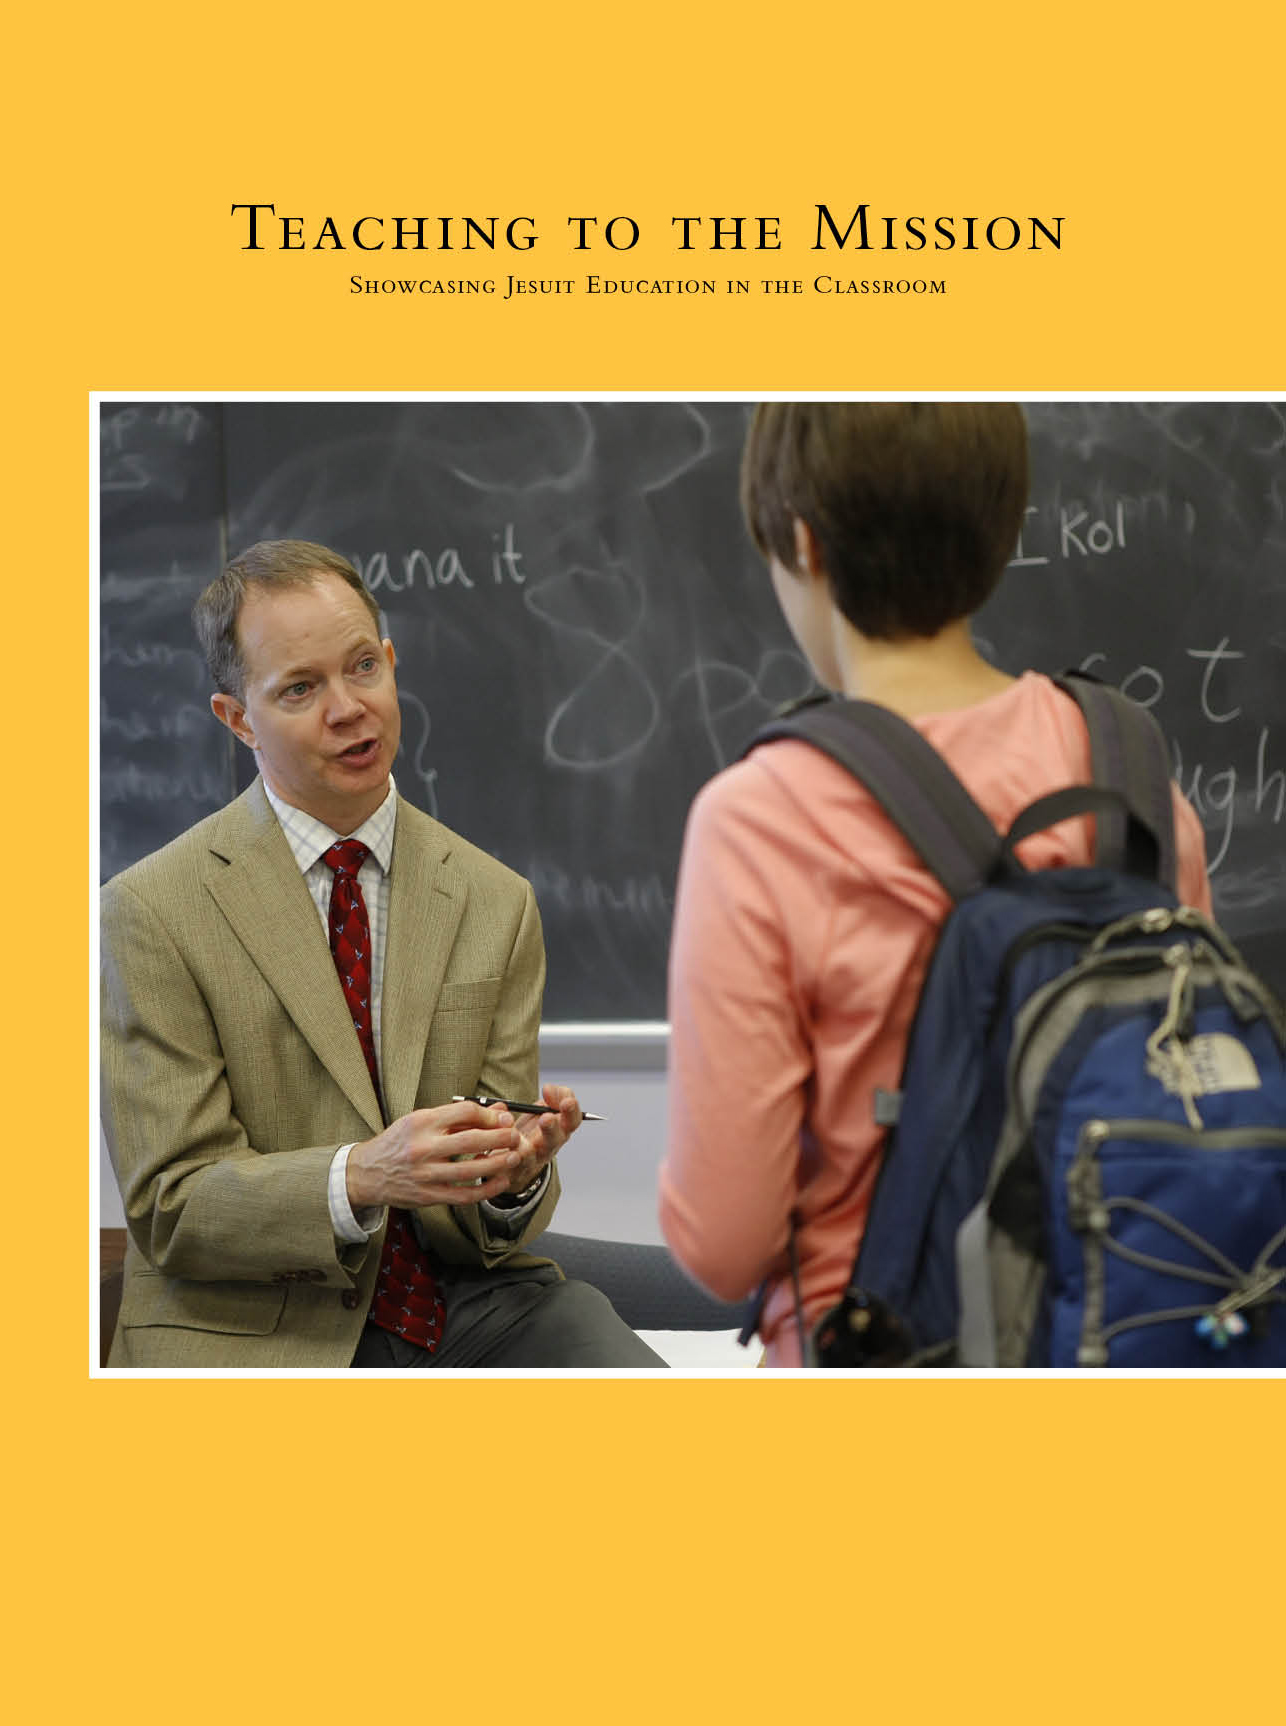 teaching-to-the-mission-2013-cover---small-graphic.jpg